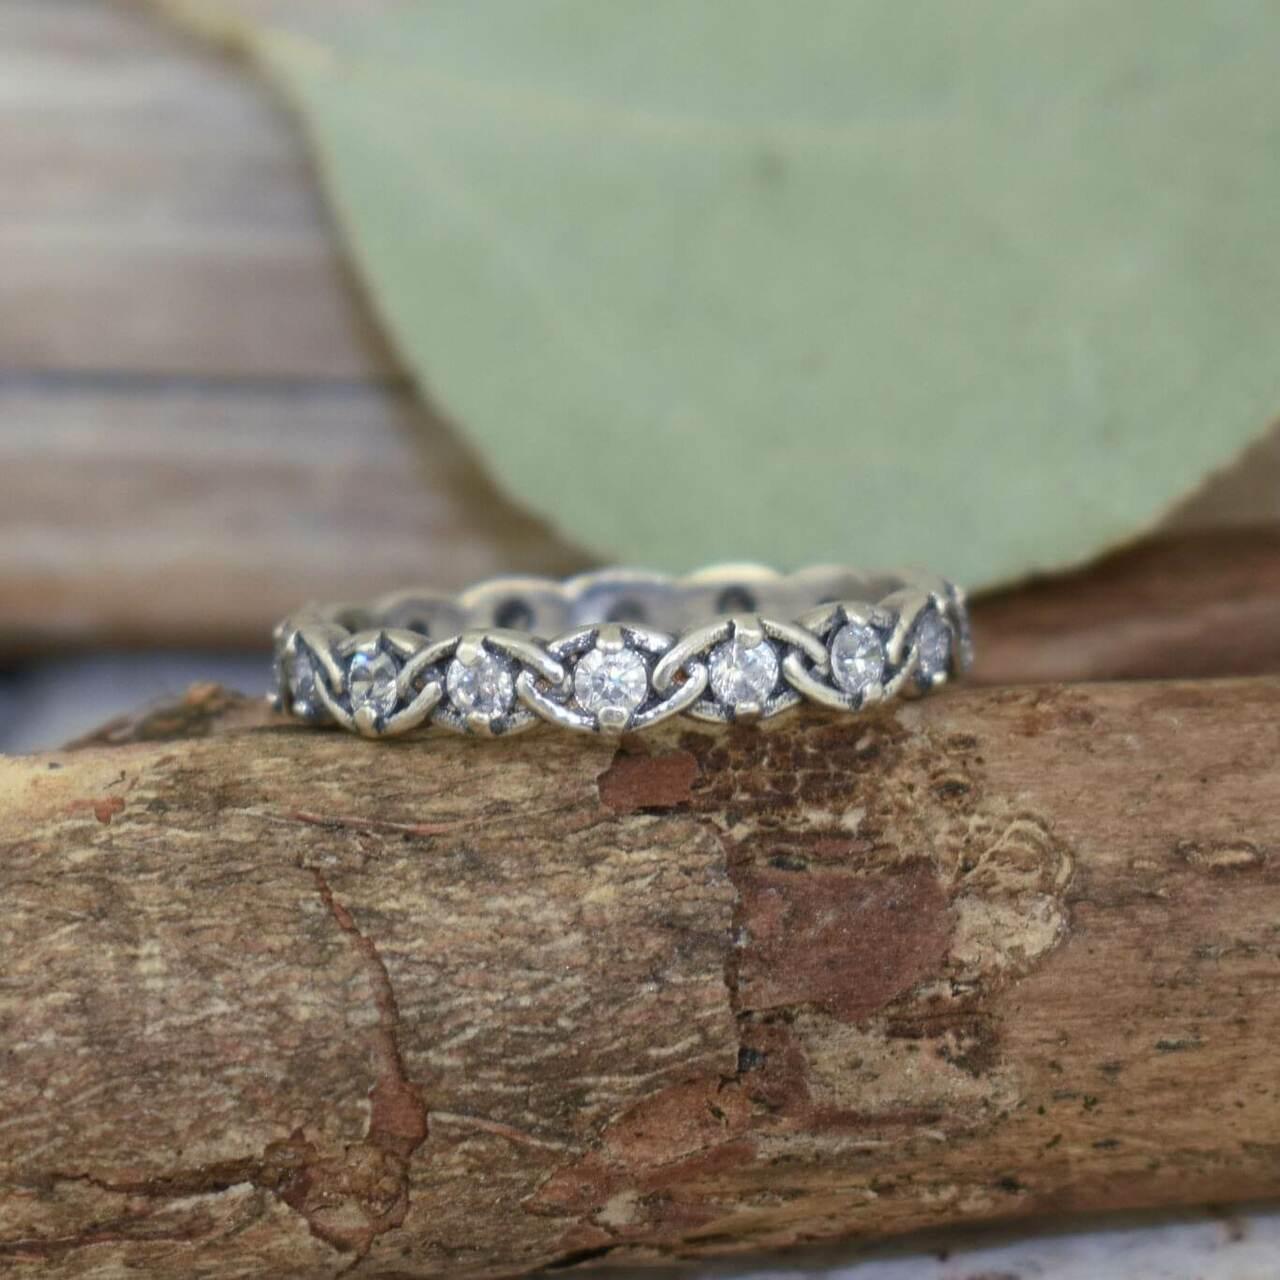 Riley Eternity Band in .925 sterling silver